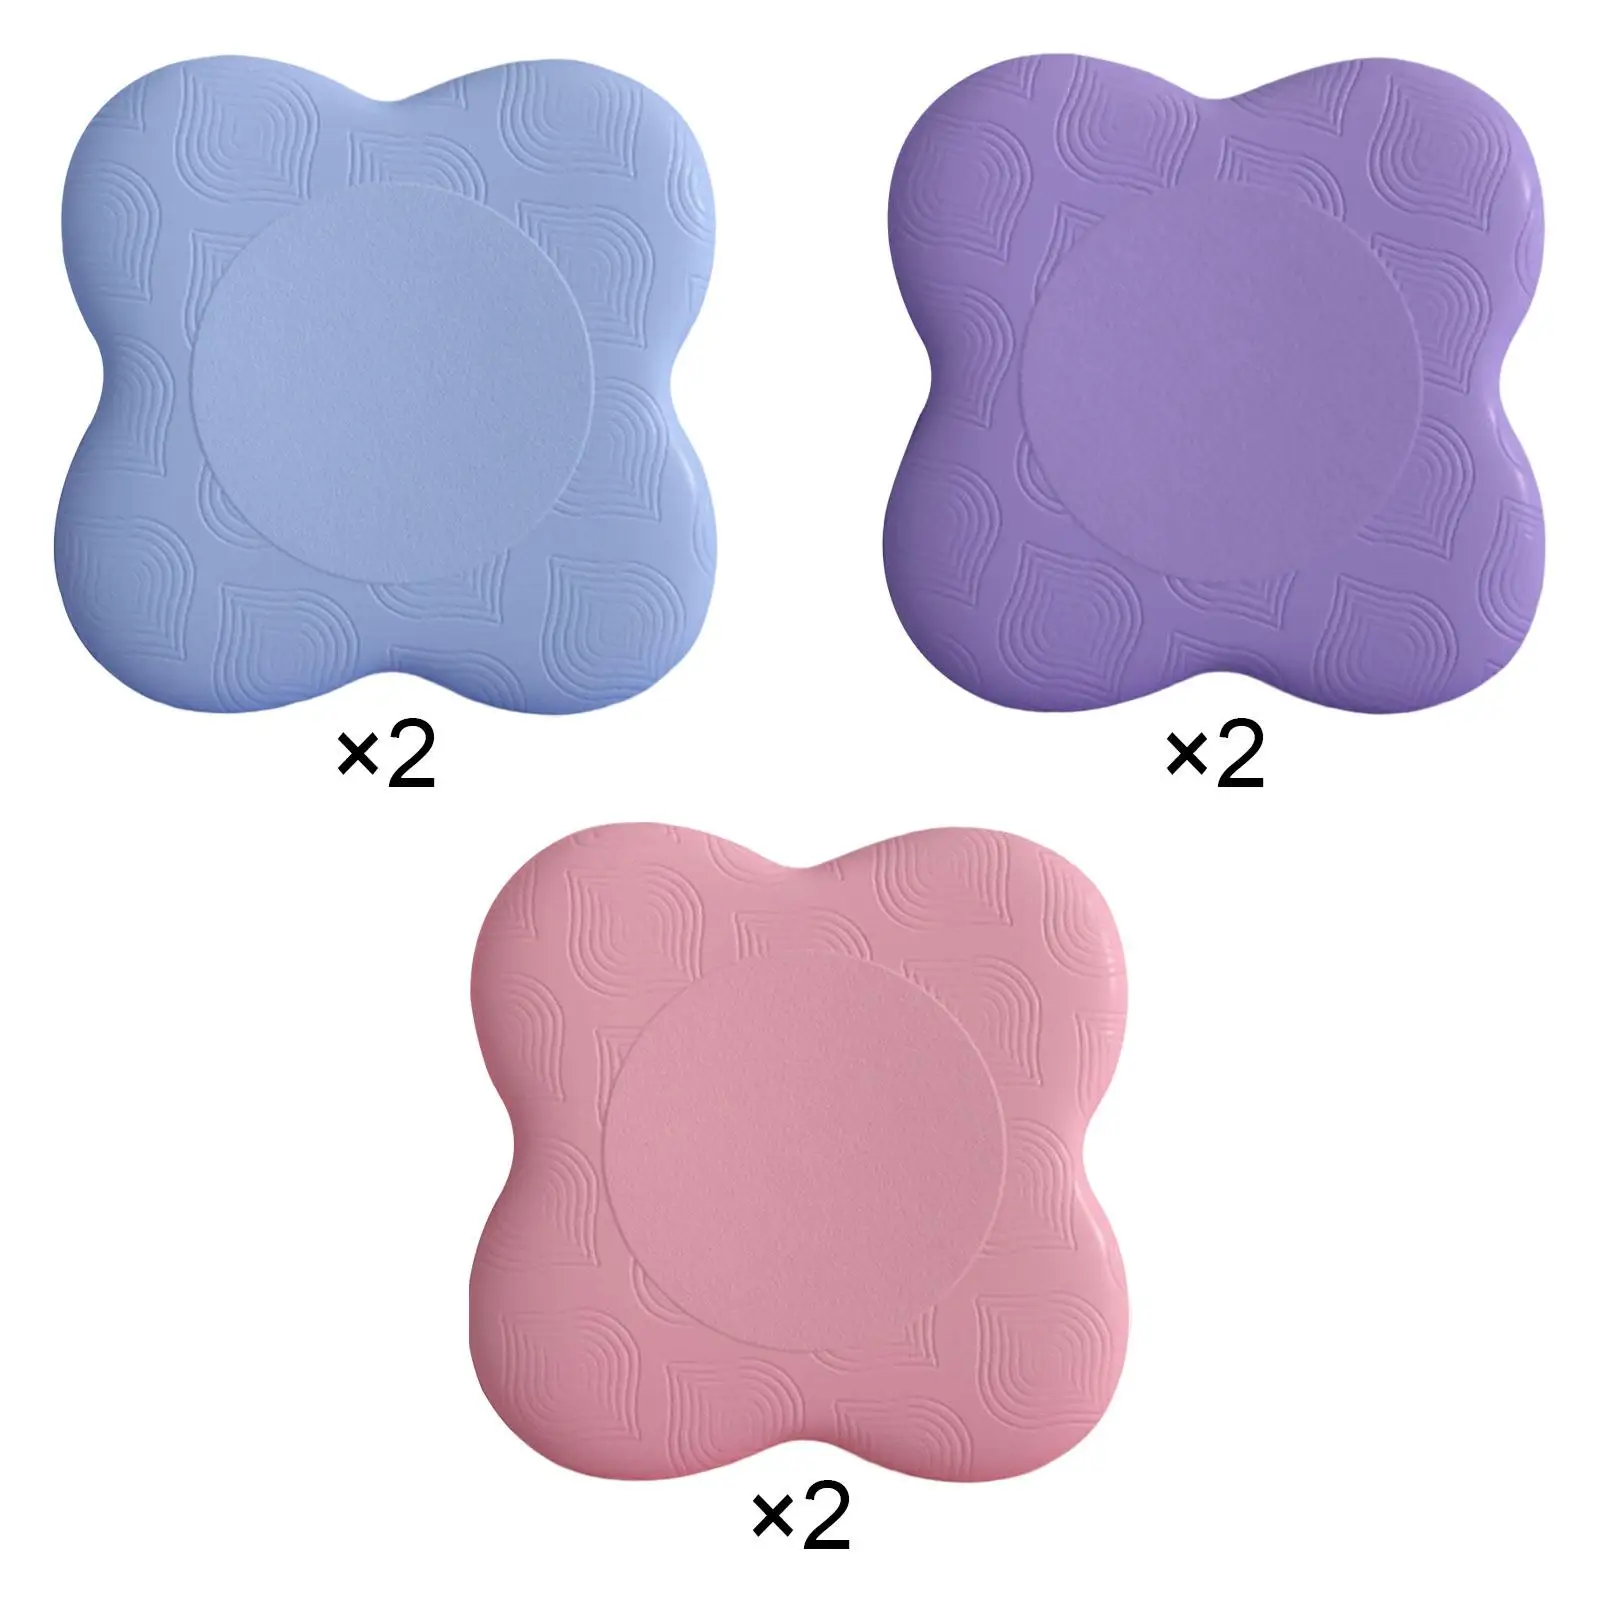 2Pcs Yoga Knee Pads Extra Thick Exercise Workout Knee Pad Kneeling Support Yoga Pad for Elbow Ankle Hands Balance Gym